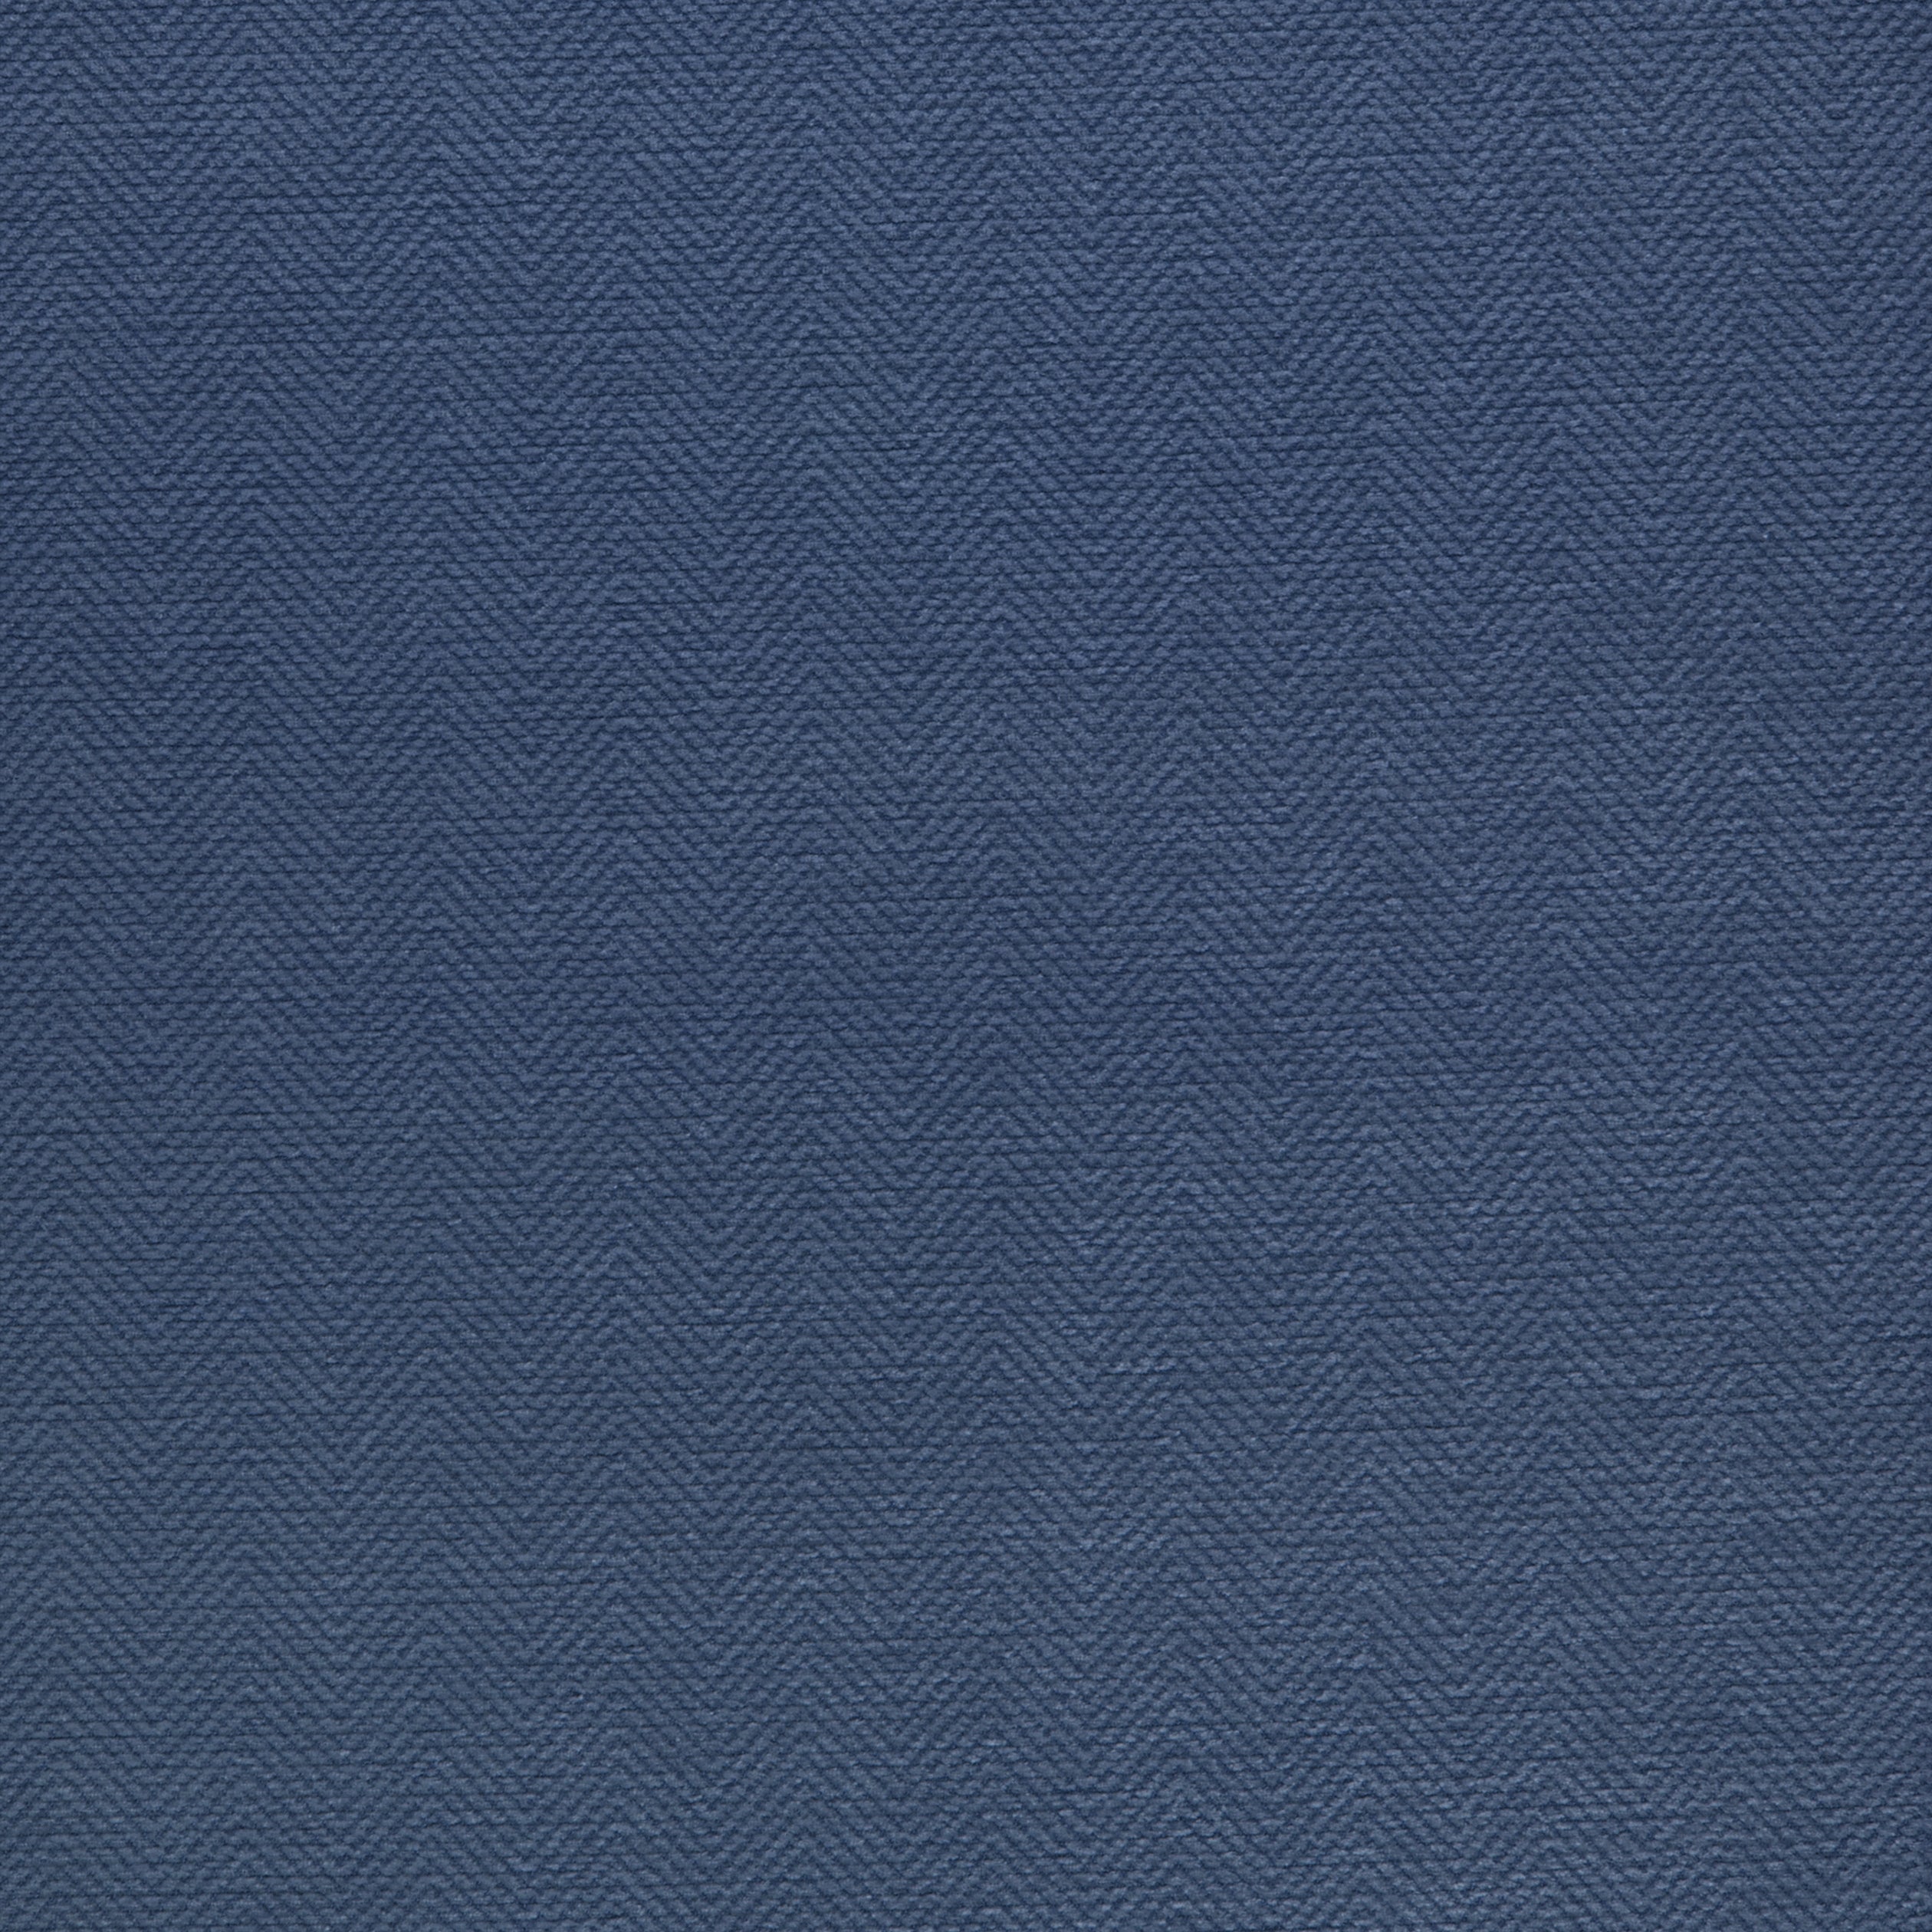 Bronwyn Herringbone fabric in blue color - pattern number W80686 - by Thibaut in the Pinnacle collection